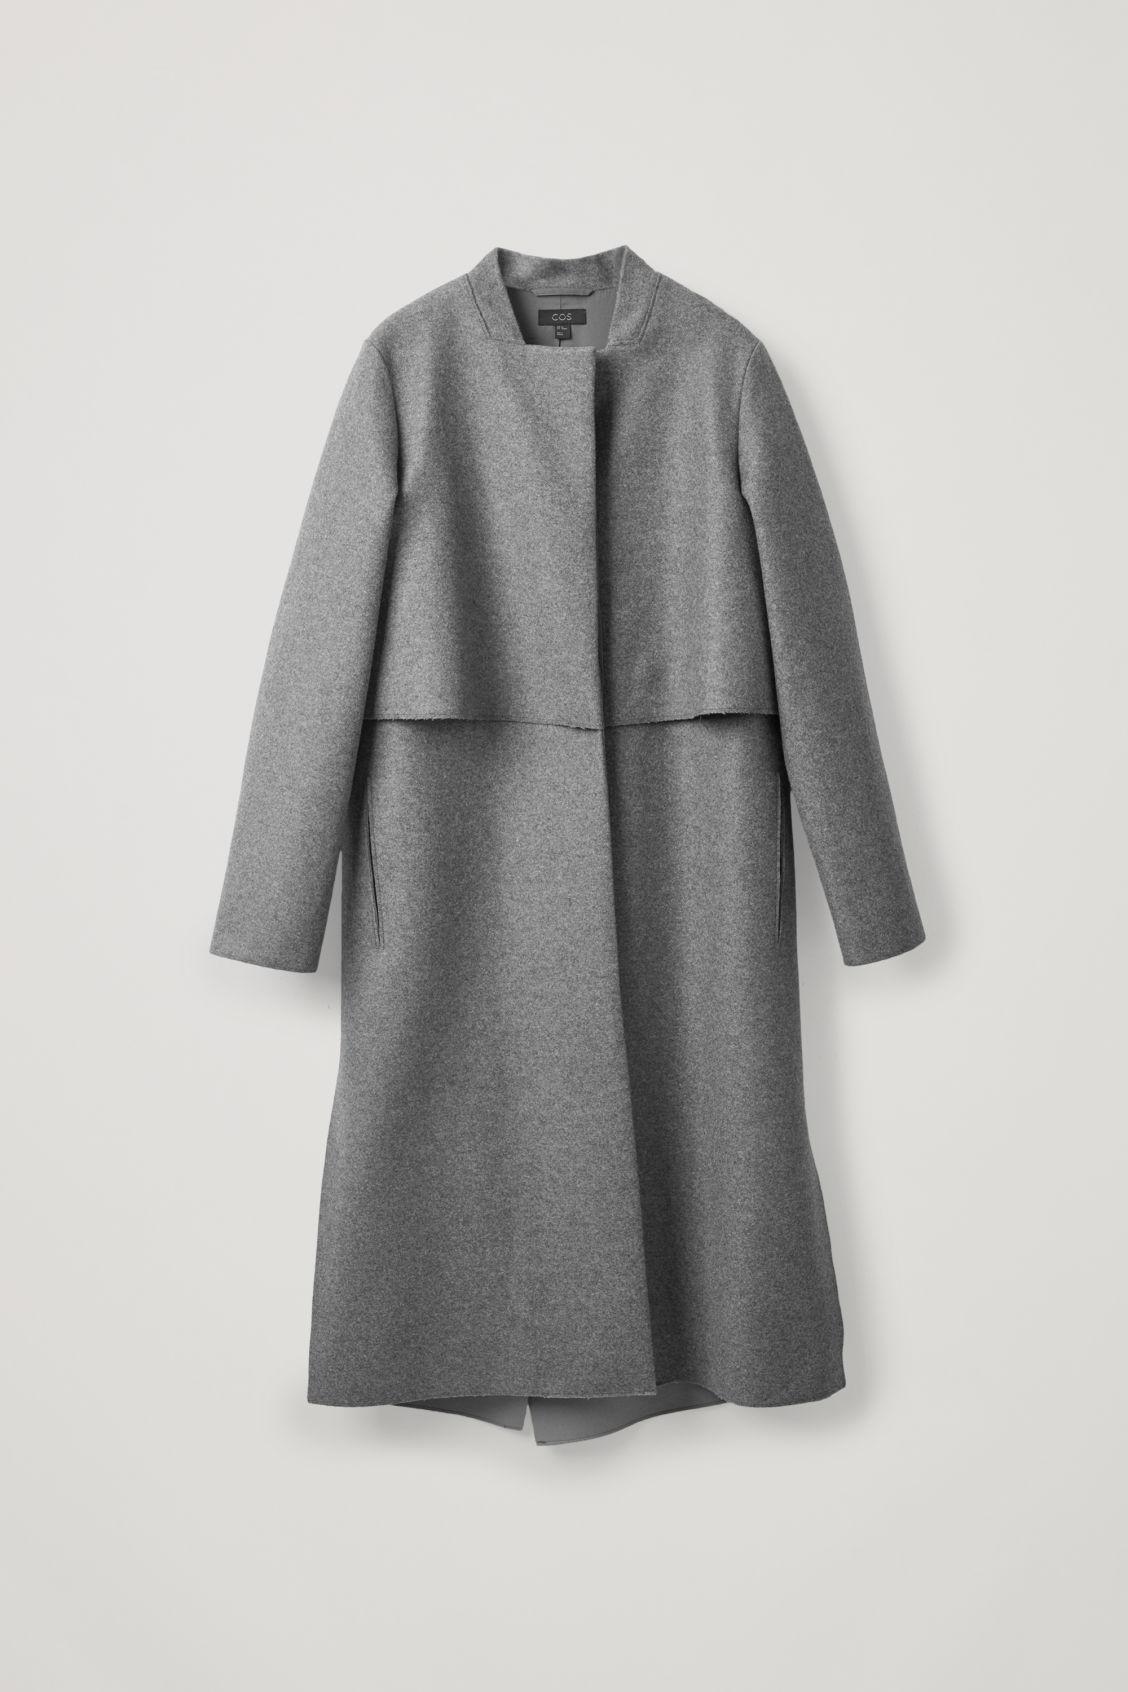 COS Square-neck Wool Coat in Grey (Gray) - Lyst